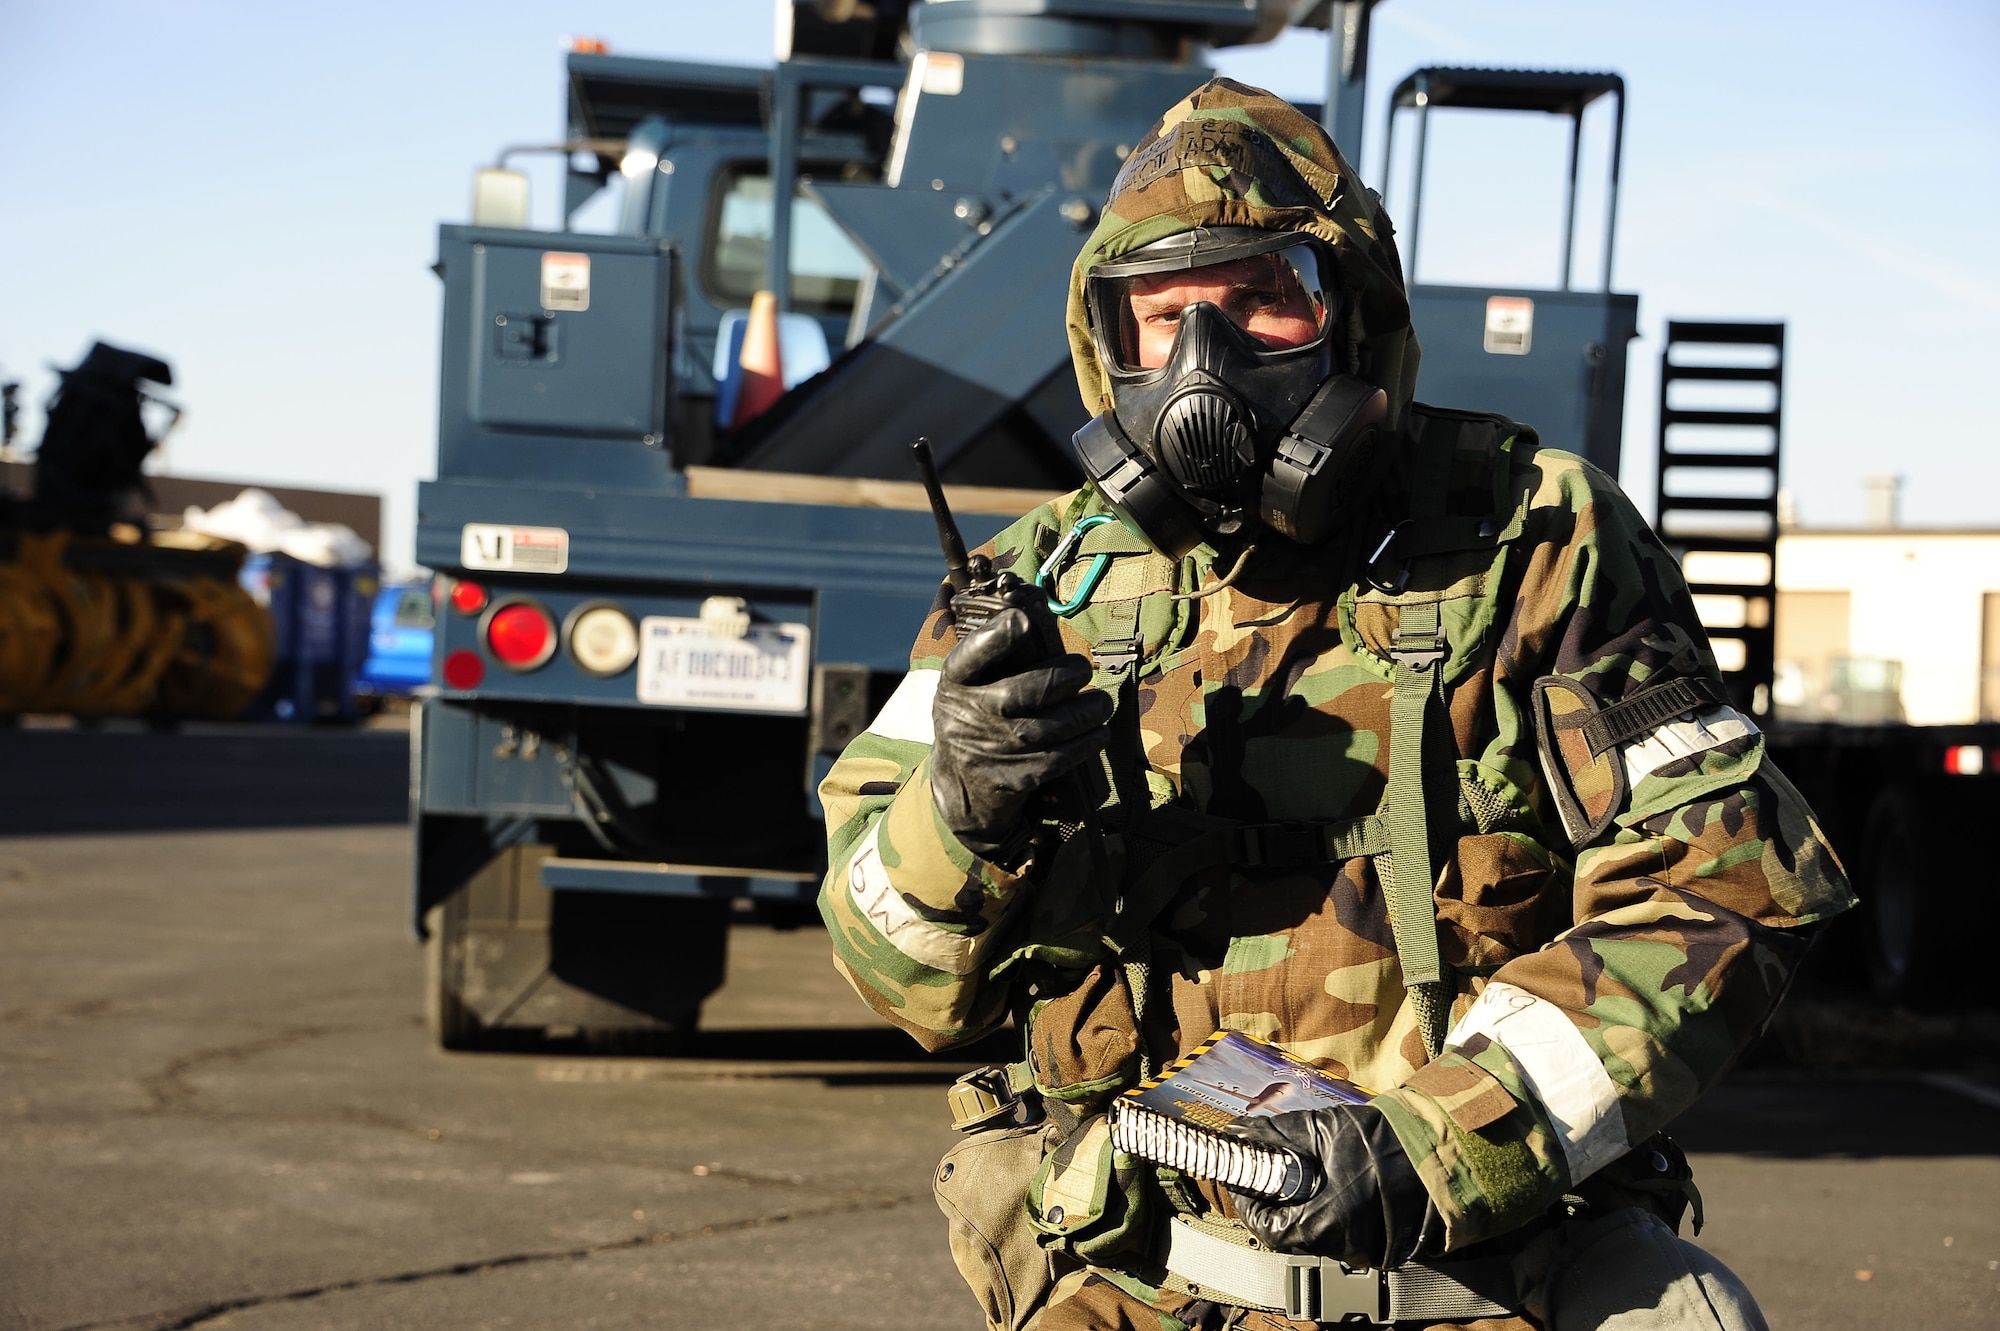 Colorado Air National Guard Staff Sgt. Darrell Linkus, EOD operator, 140th Civil Engineer Squadron, conducts Post Attack Reconnaissance sweeps at Buckley Air Force Base, Colo., Oct. 17, 2015. The 140th Wing is conducting a four-day wartime readiness inspection as part of the new Air Force Inspection System to assess the wing's ability to perform their combat missions. (U.S. Air National Guard photo by Tech. Sgt. Nicole Manzanares)